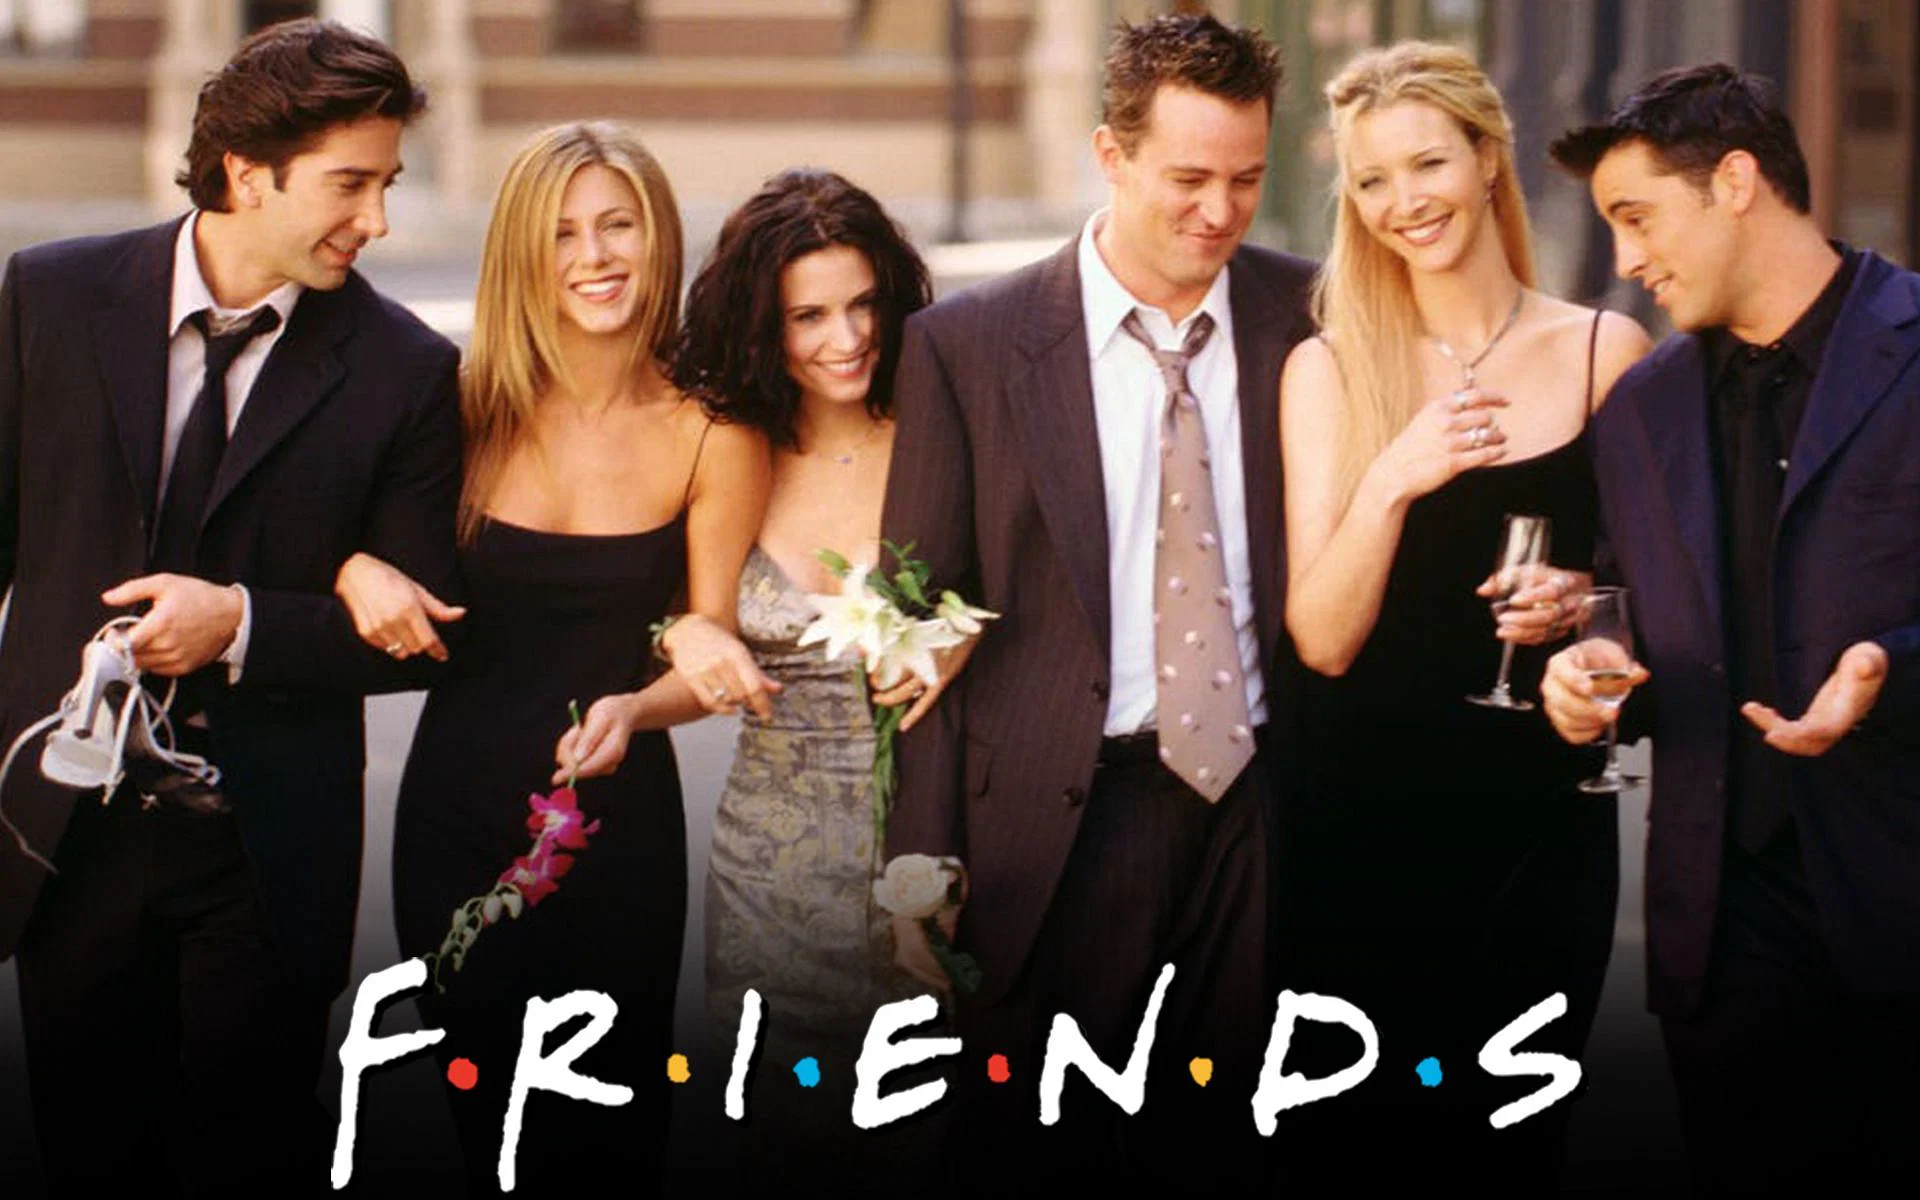 2004 The final episode of Friends is aired